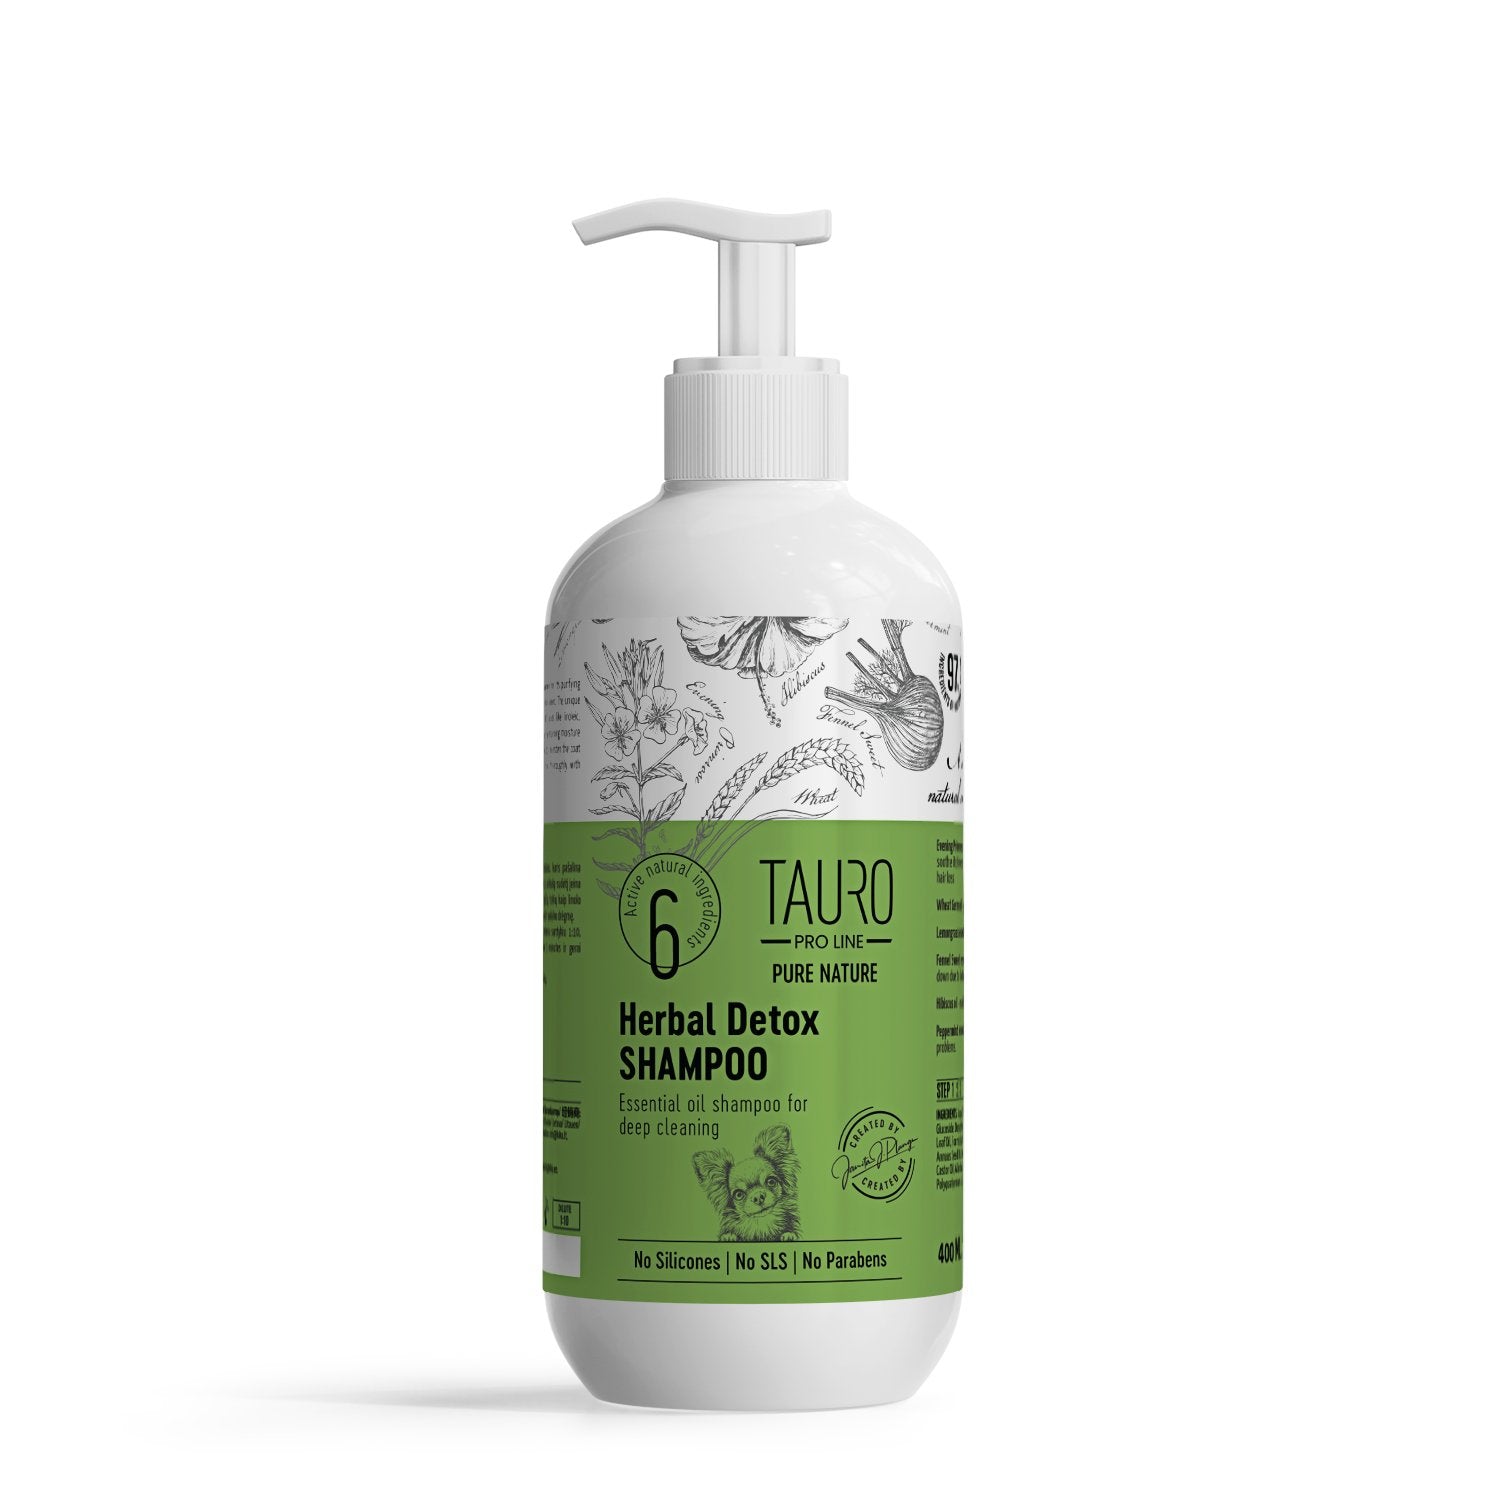 Pro favorite shampoo Line Line your Tauro Buy brand, Pro online Shampoo: from Tauro